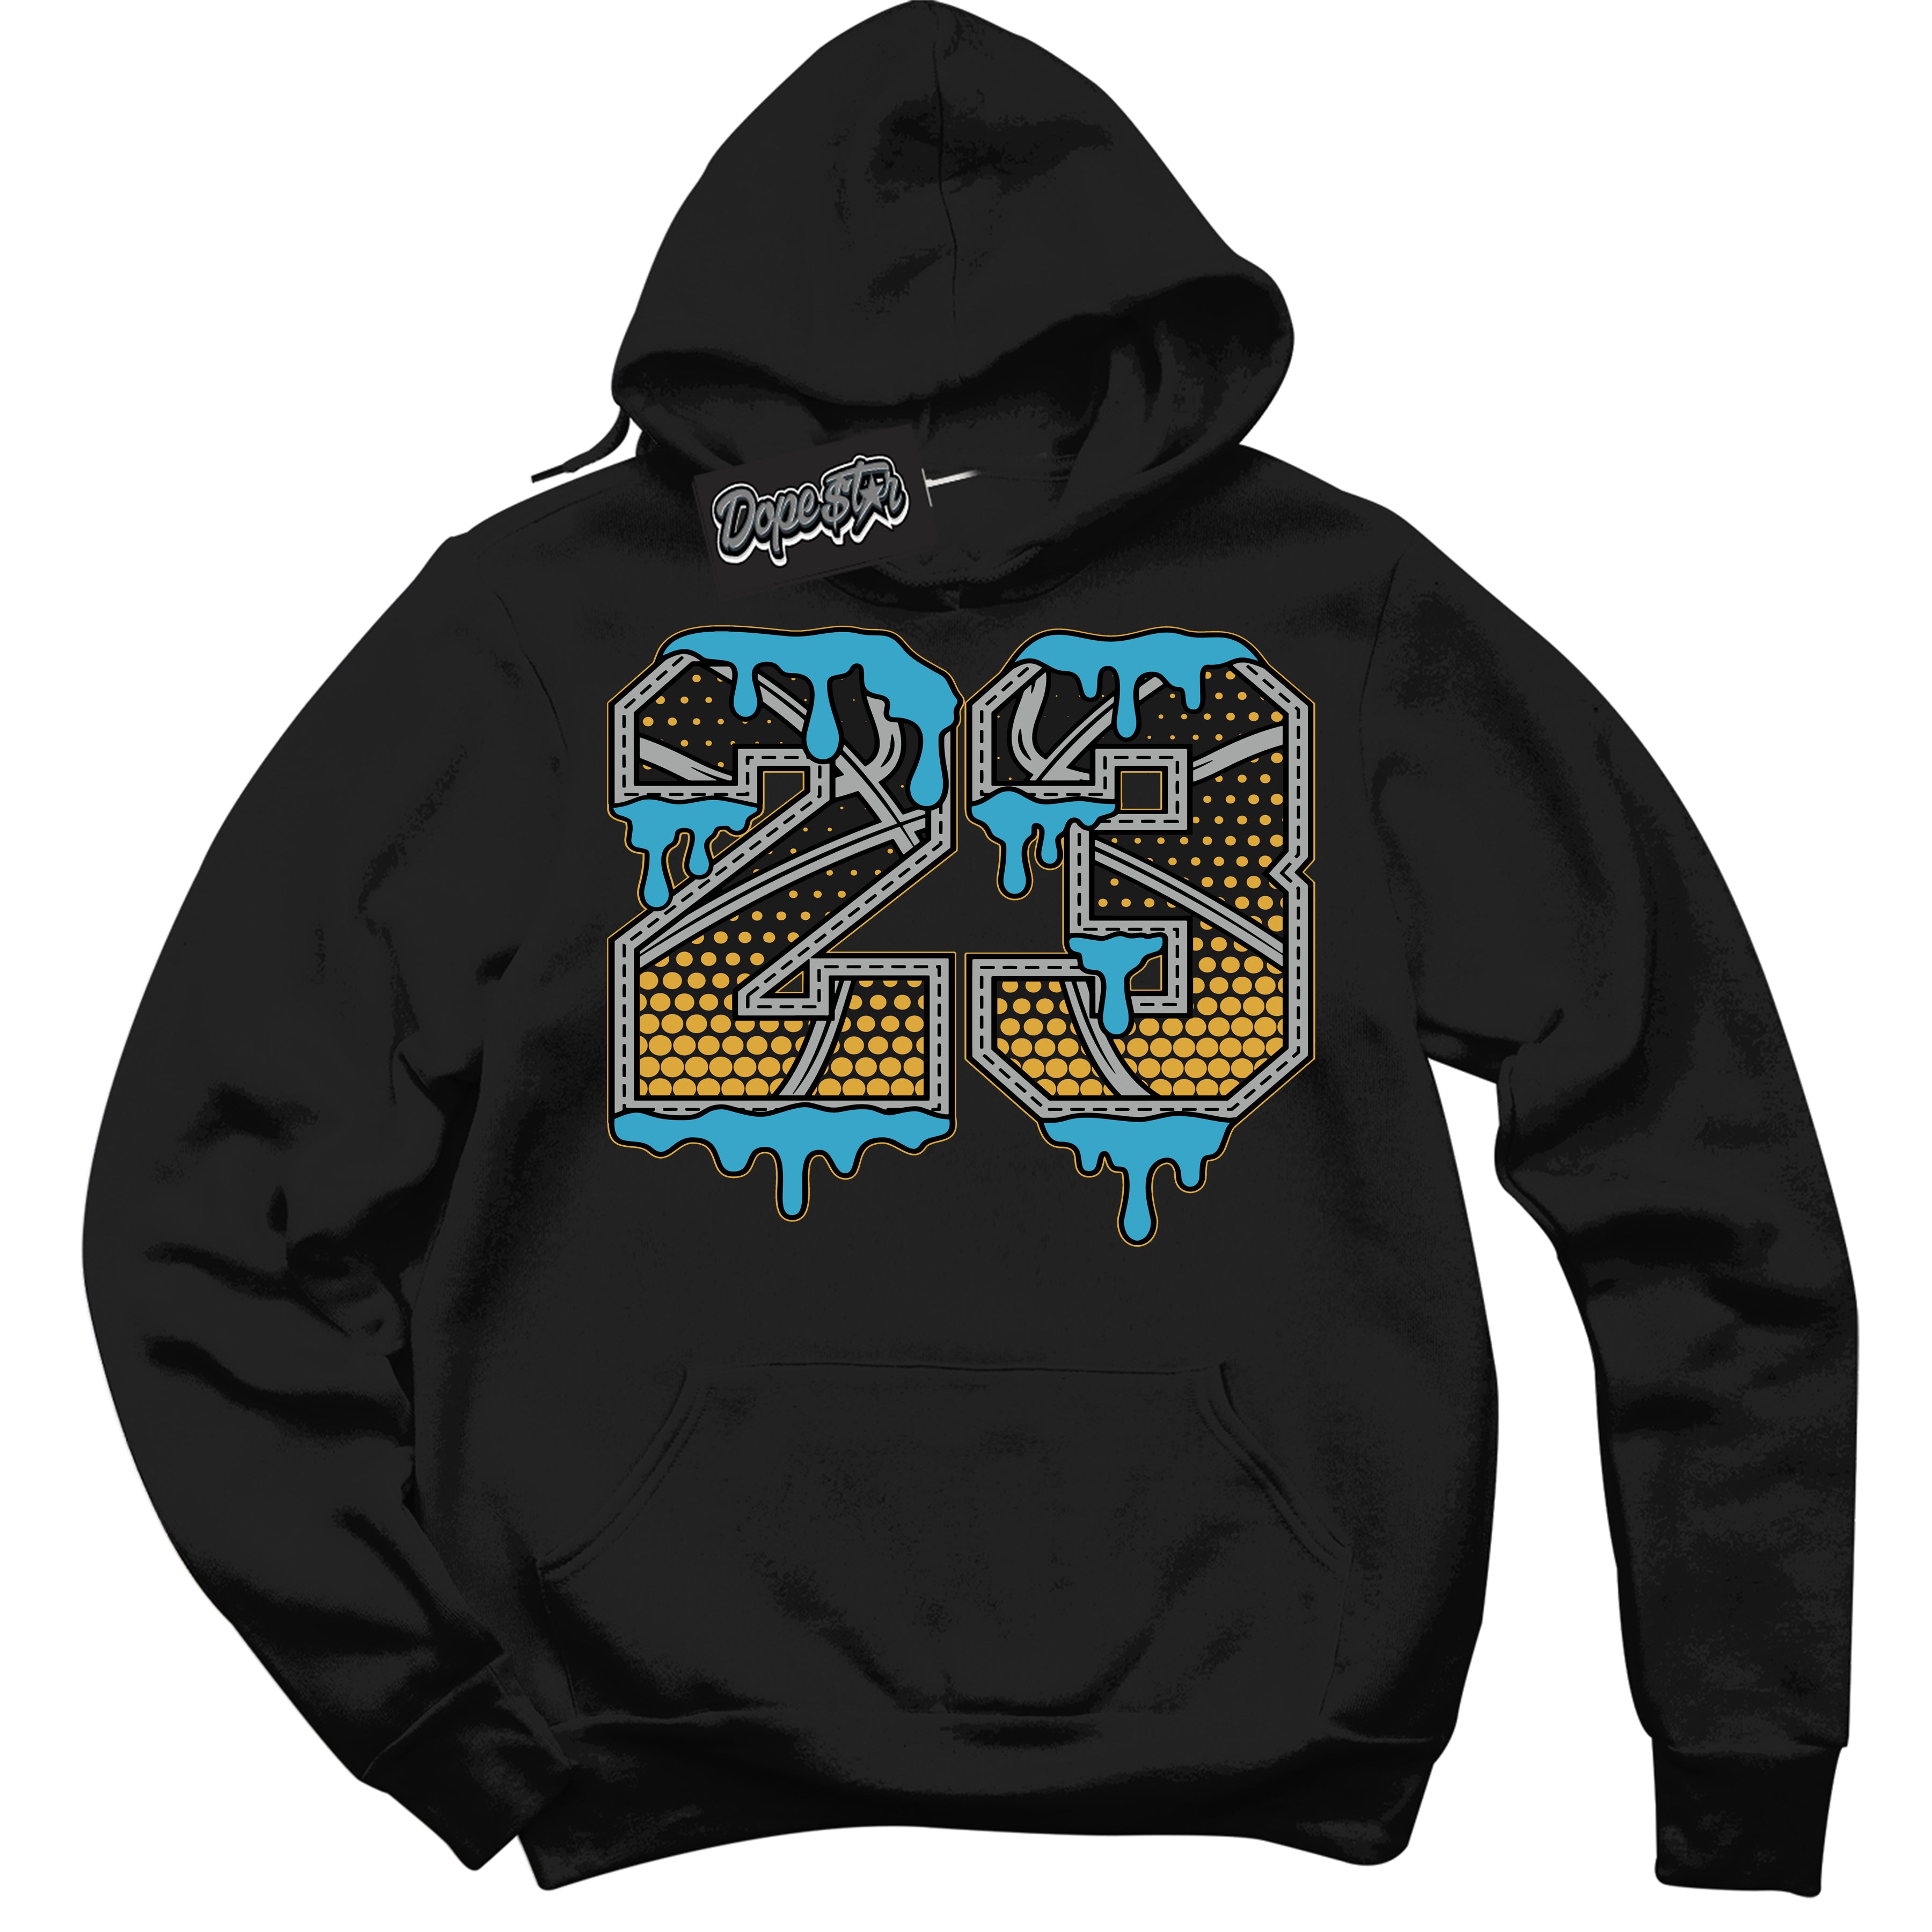 Cool Black Hoodie with “ 23 Ball ”  design that Perfectly Matches Aqua 5s Sneakers.